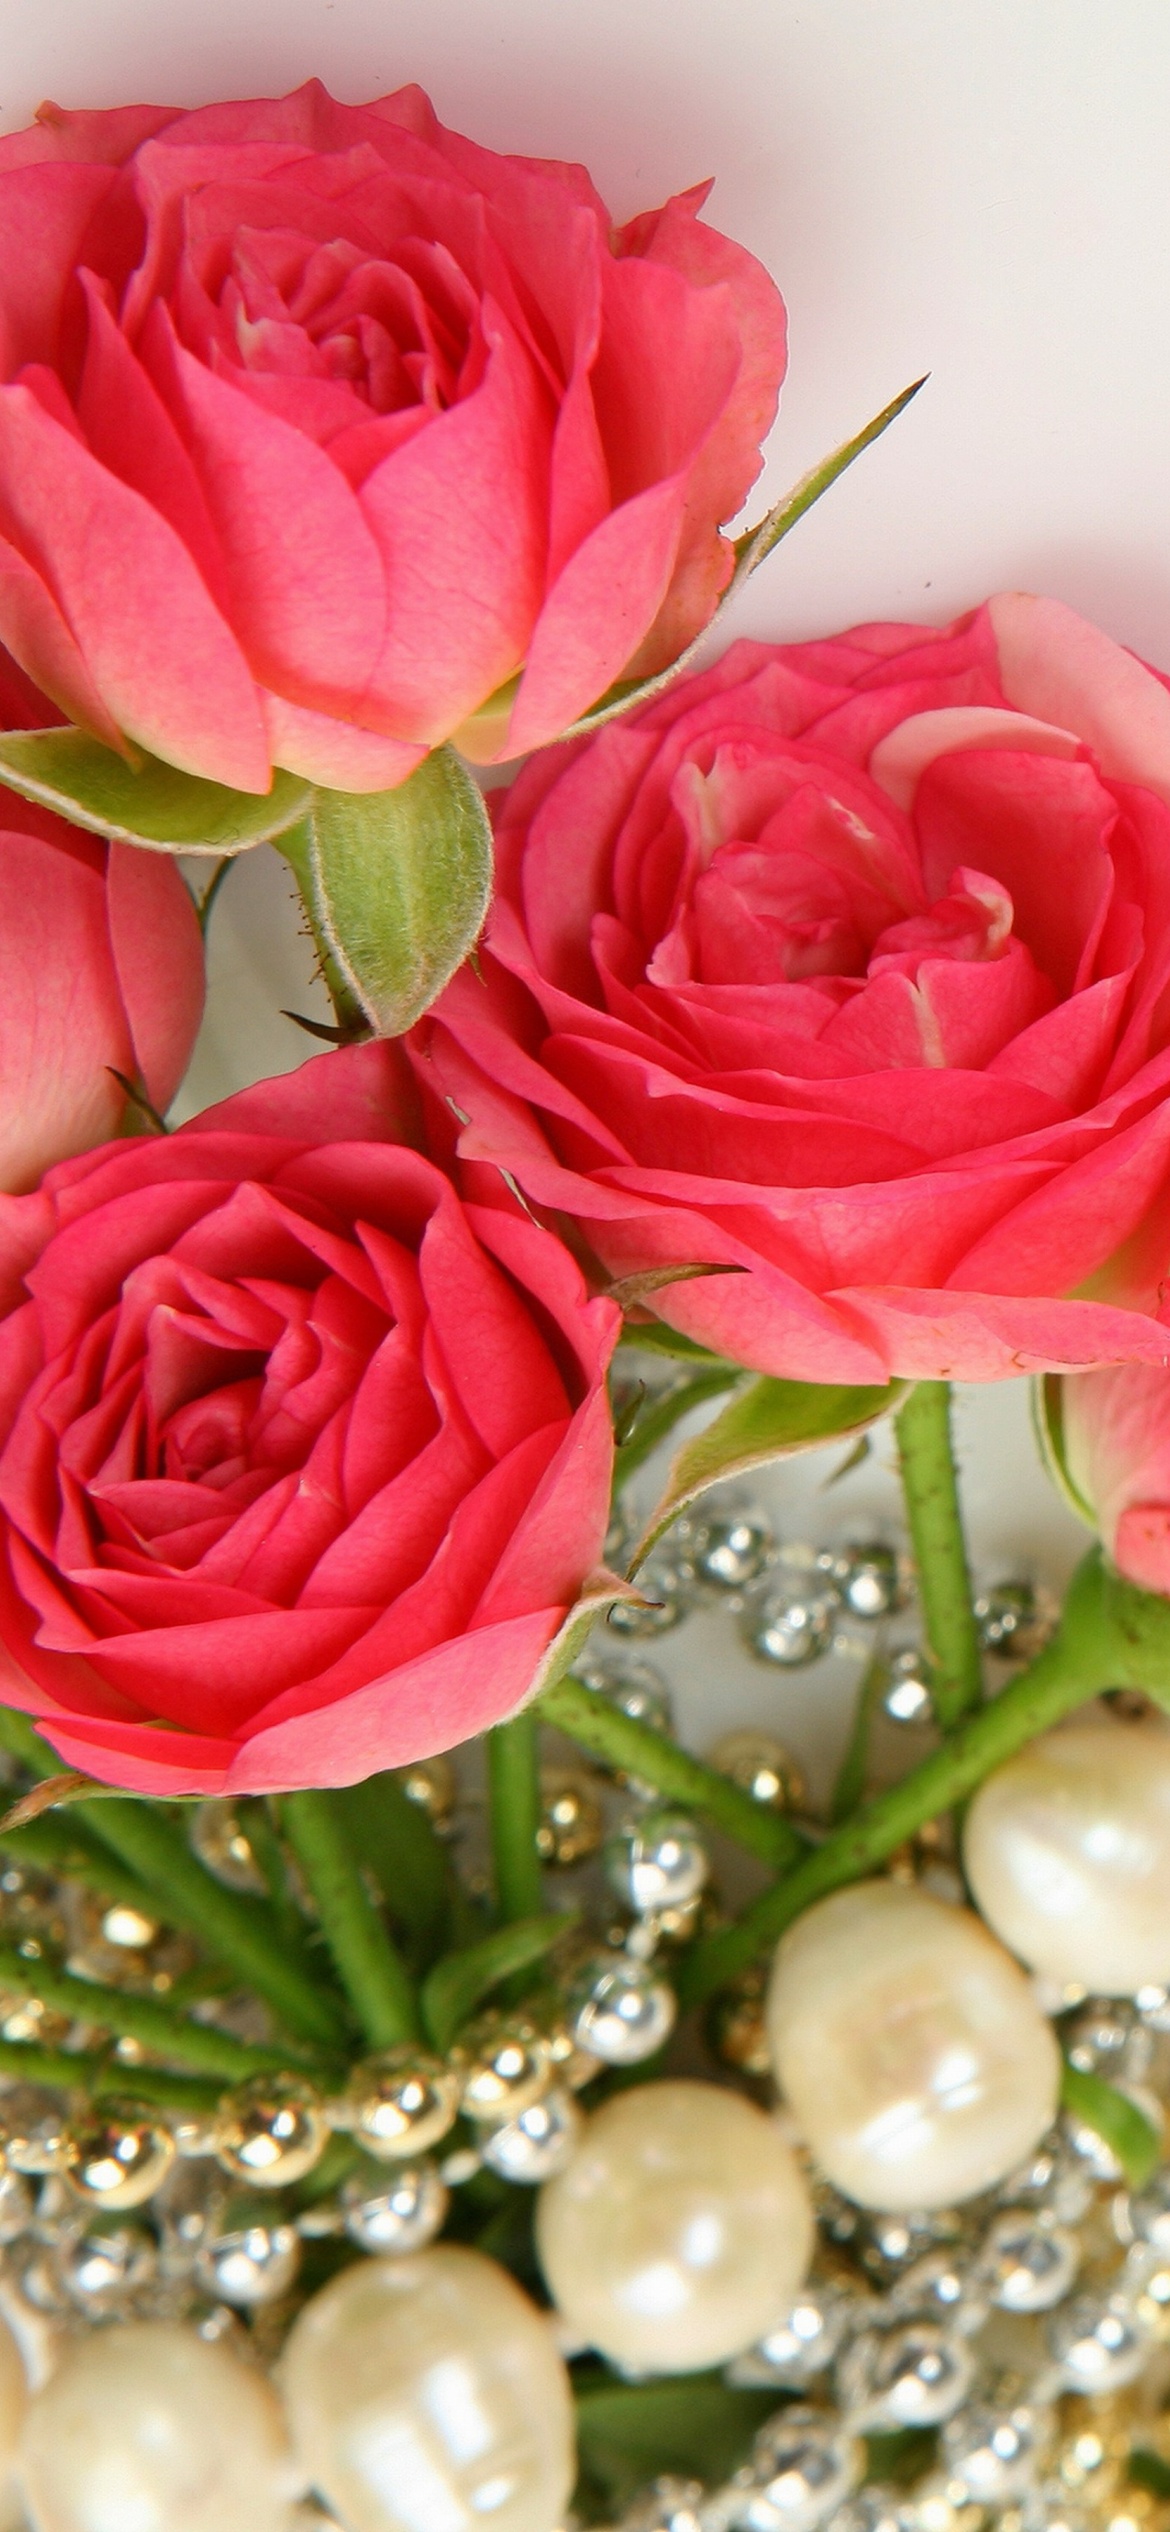 Das Necklace and Roses Bouquet Wallpaper 1170x2532